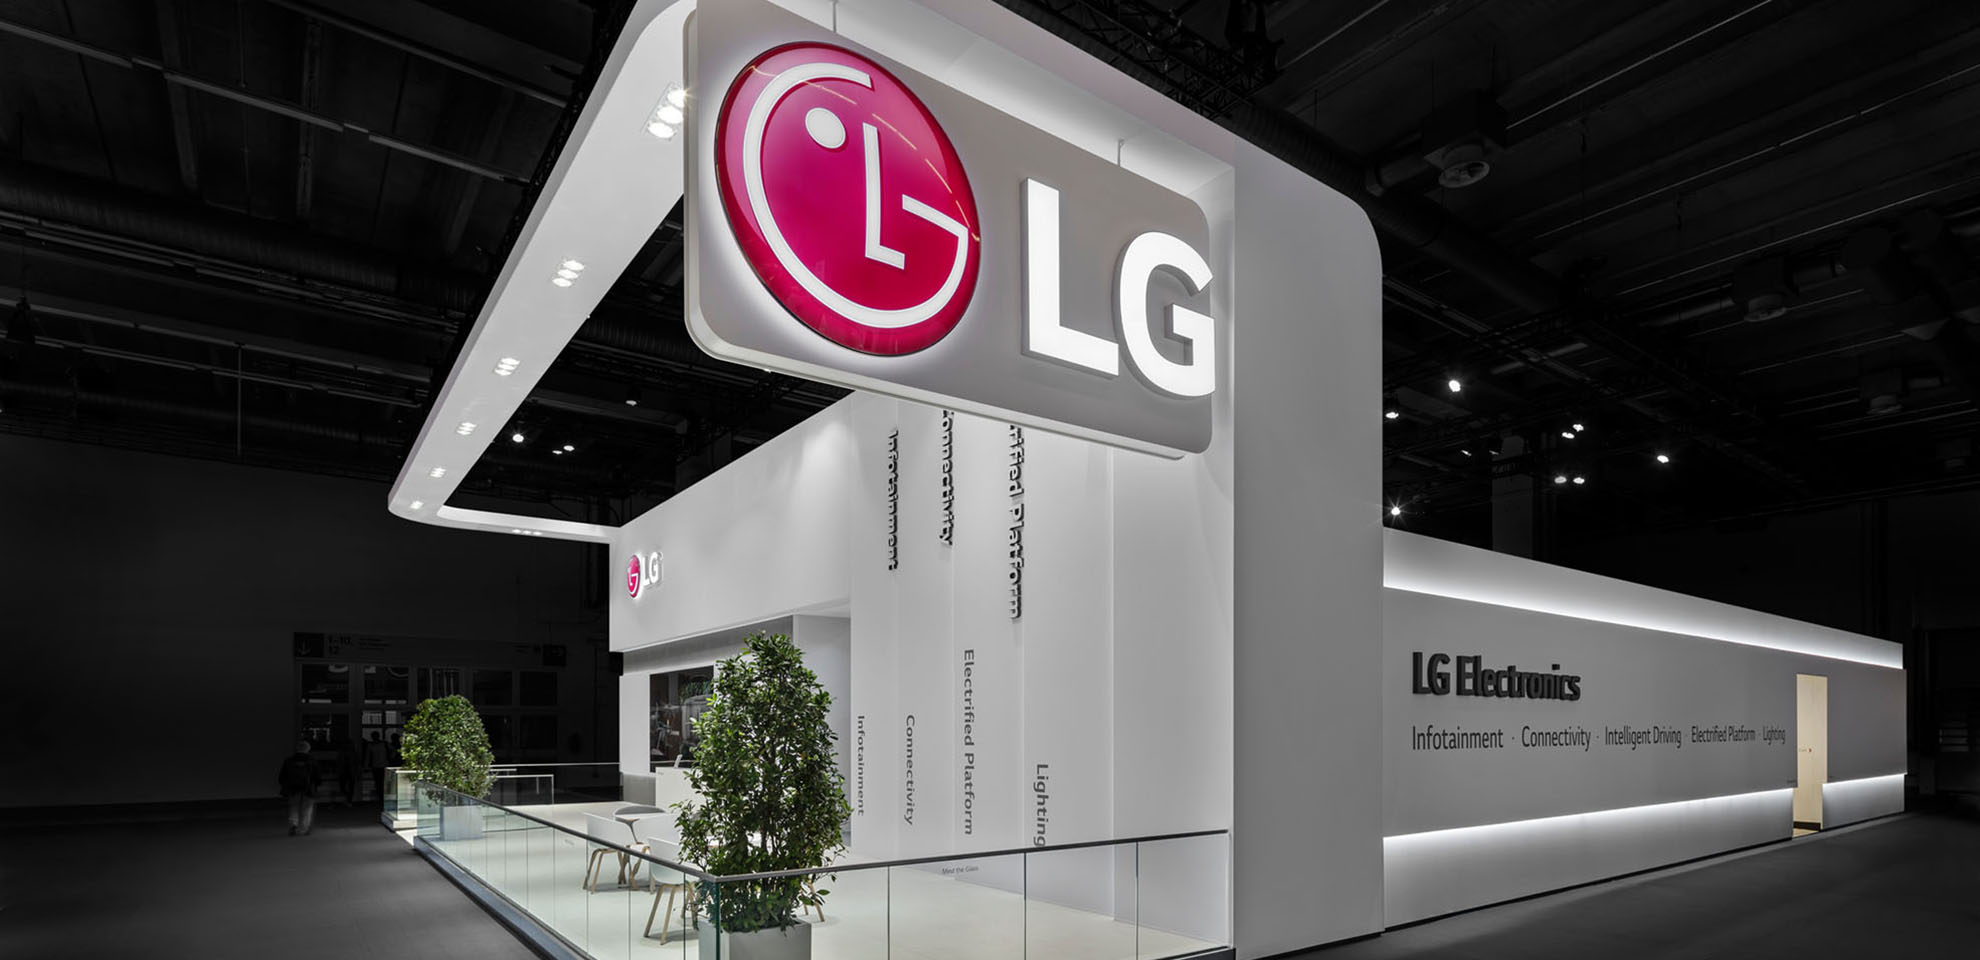 Exhibition stand builder in Frankfurt responsible for LG's exhibition stand at the IAA Mobility